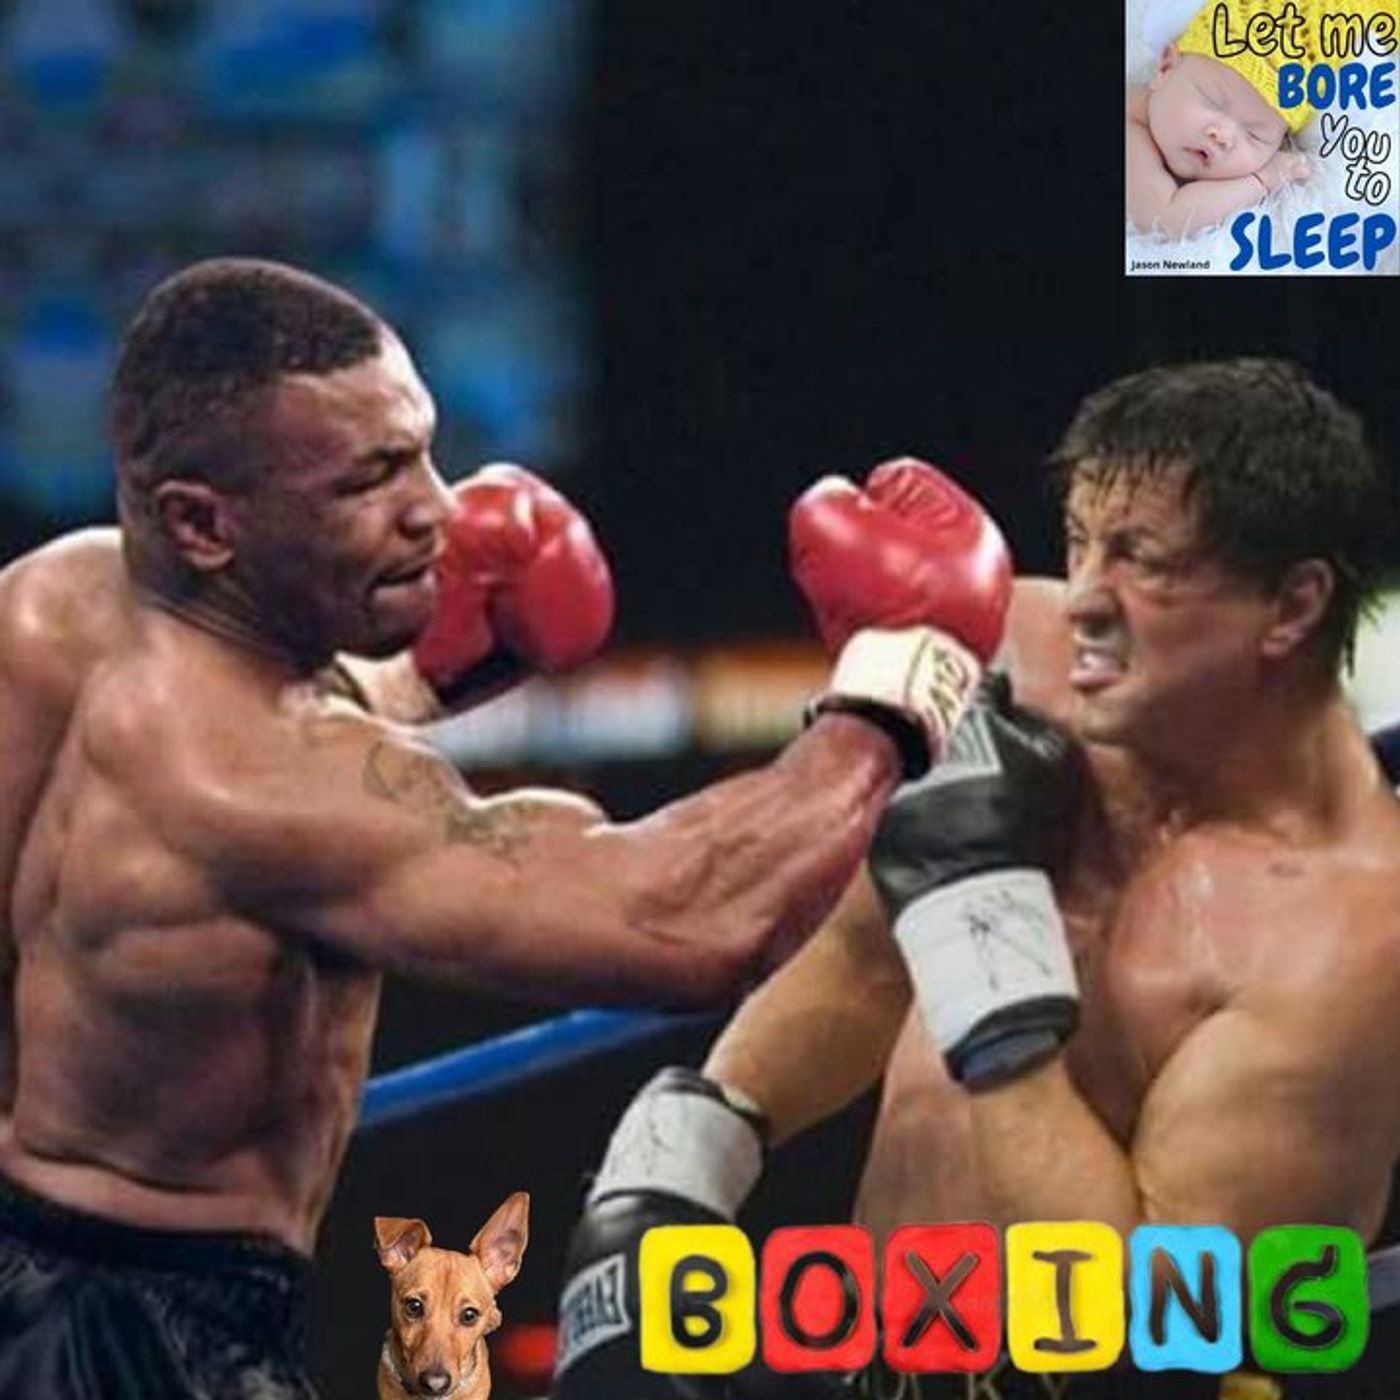 (10 hours) #1036 - Boxing - Let me bore you to sleep